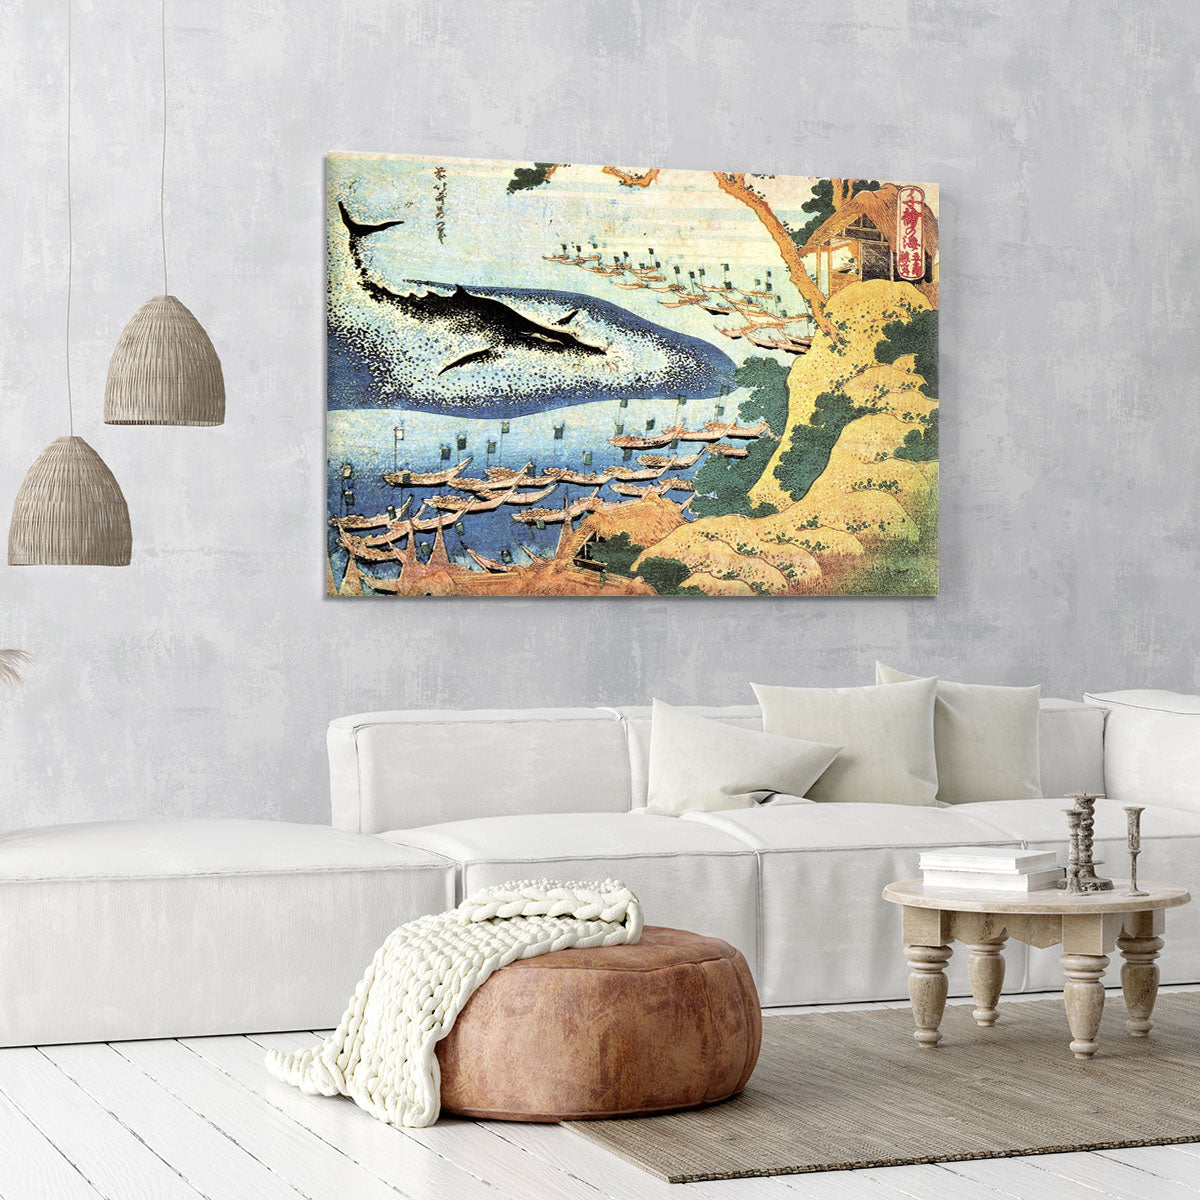 Ocean landscape and whale by Hokusai Canvas Print or Poster - Canvas Art Rocks - 6